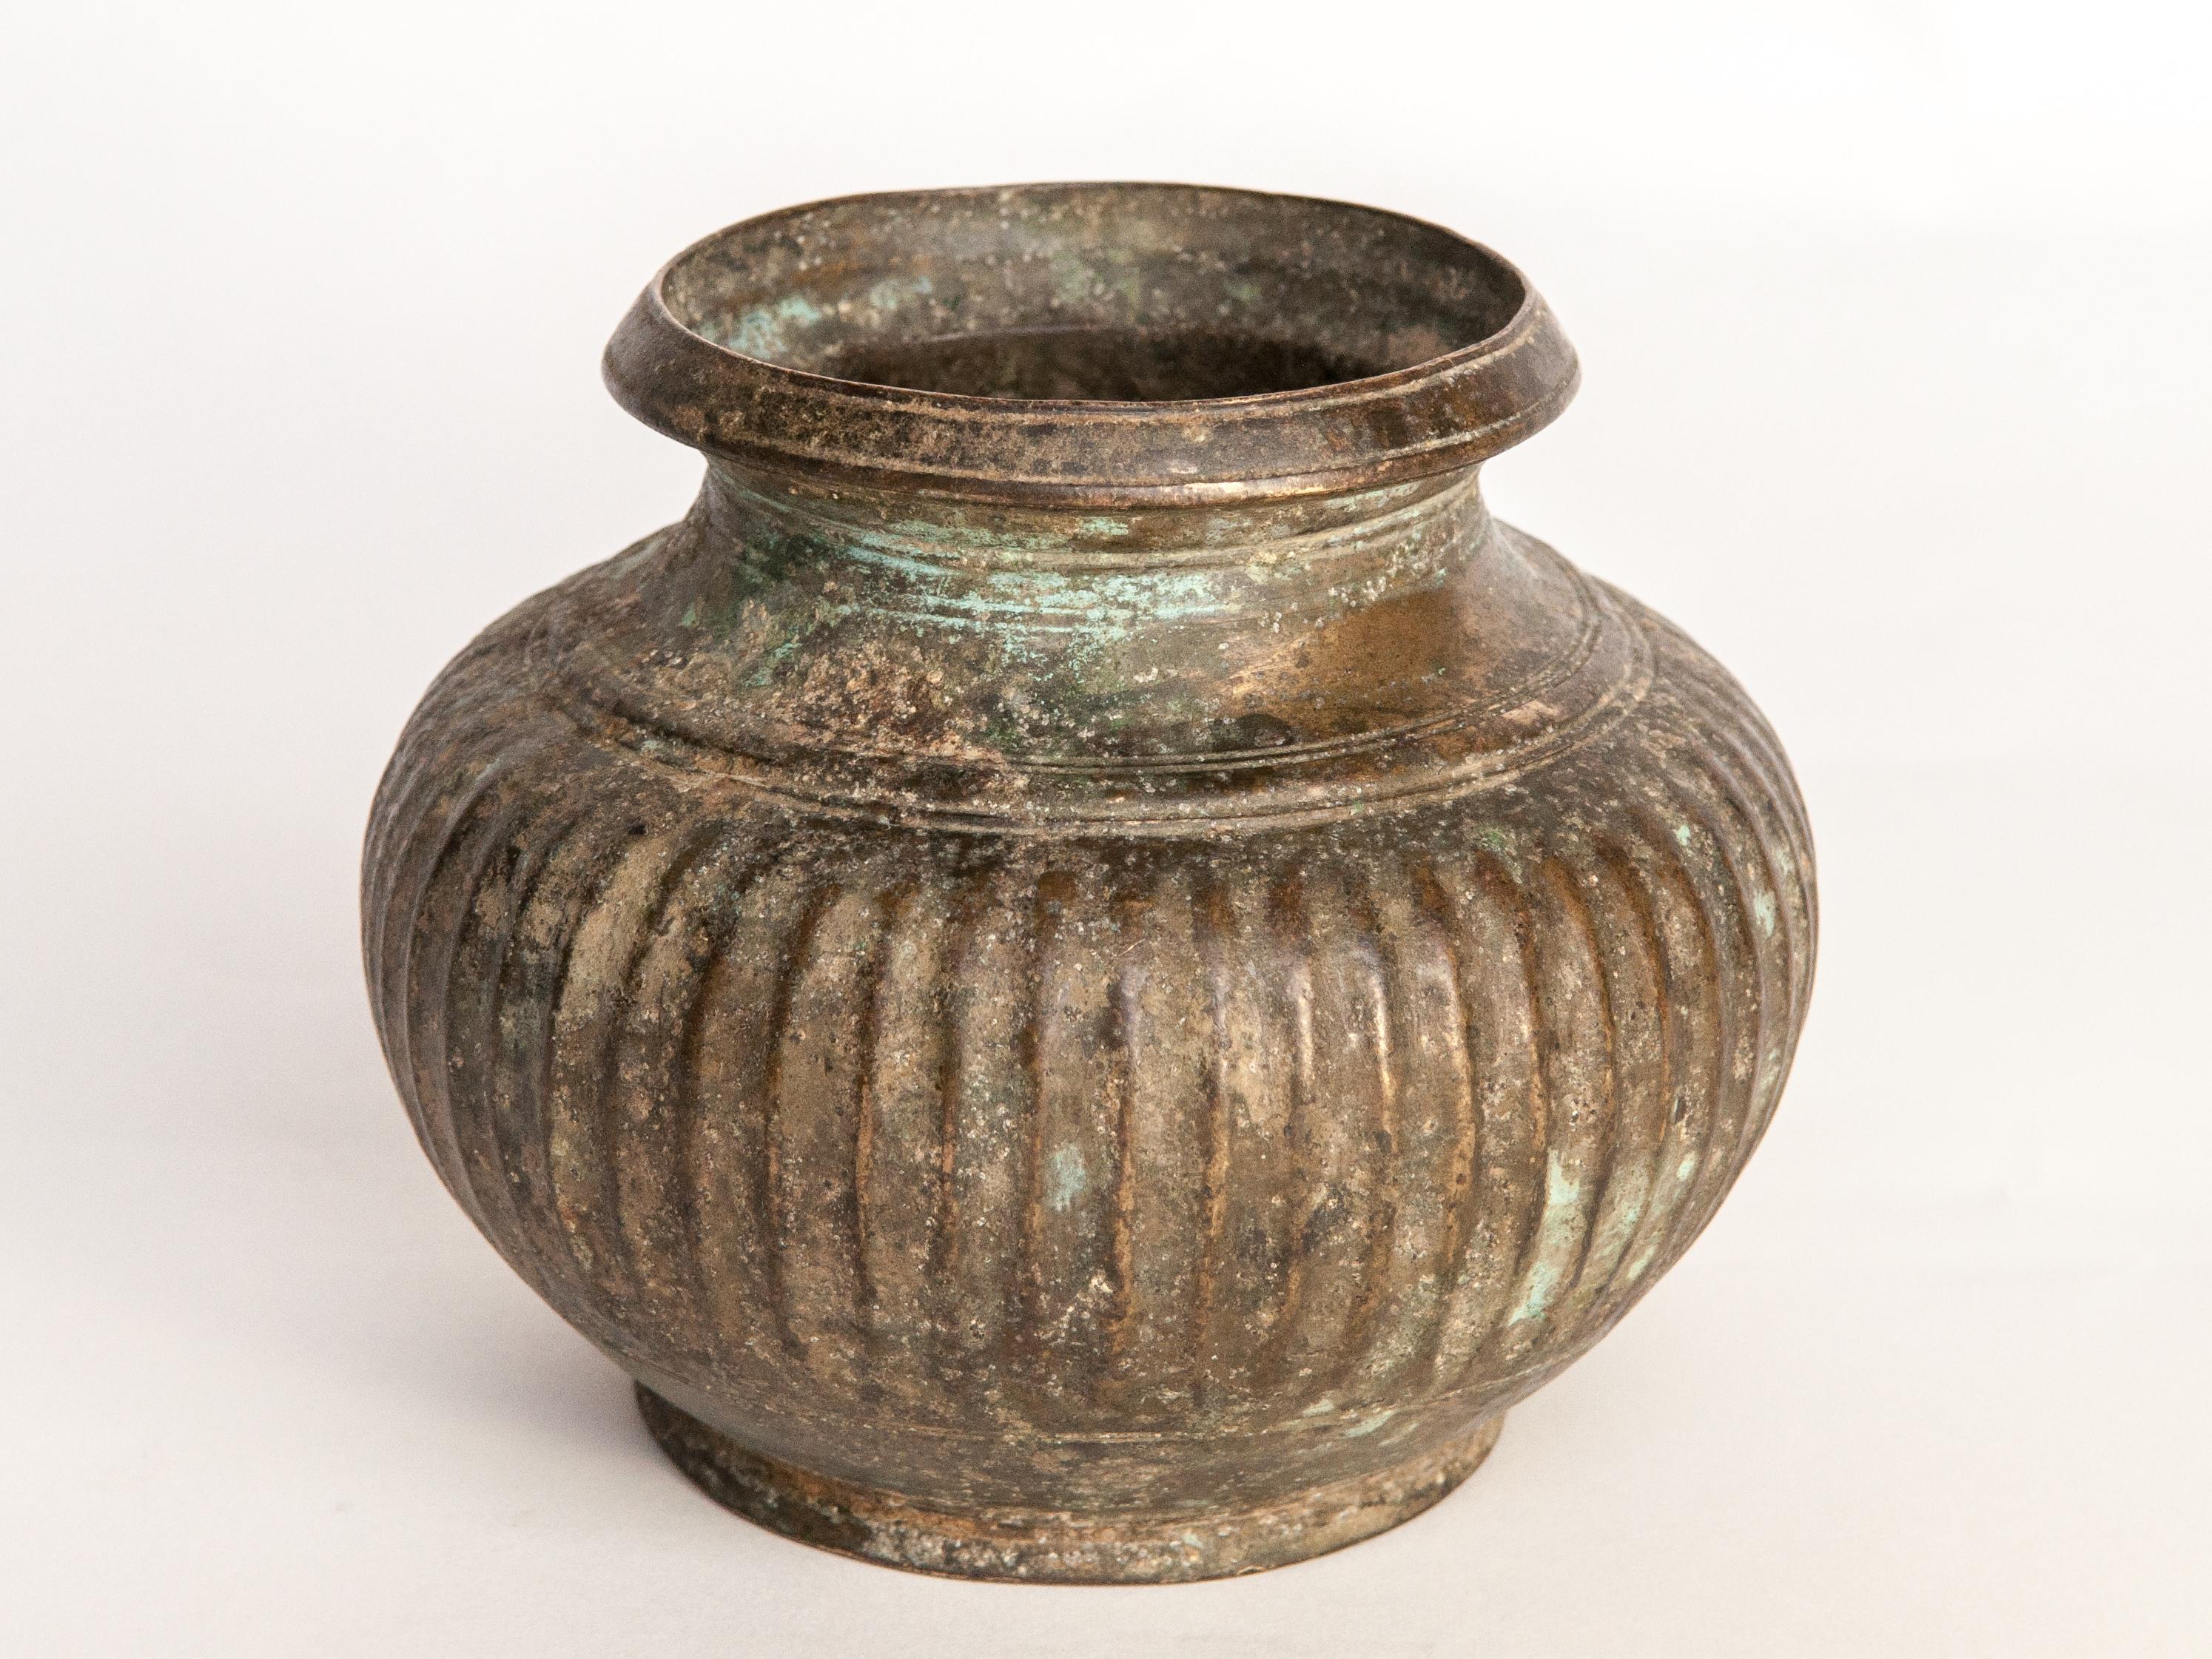 Antique Tibetan bronze pot, 18th century or earlier. Unearthed in Tibet, with a beautifully balanced shape and a lovely aged patina.
The pot is in very good condition.
Dimensions: 6 inch diameter by 4.75 inches tall.